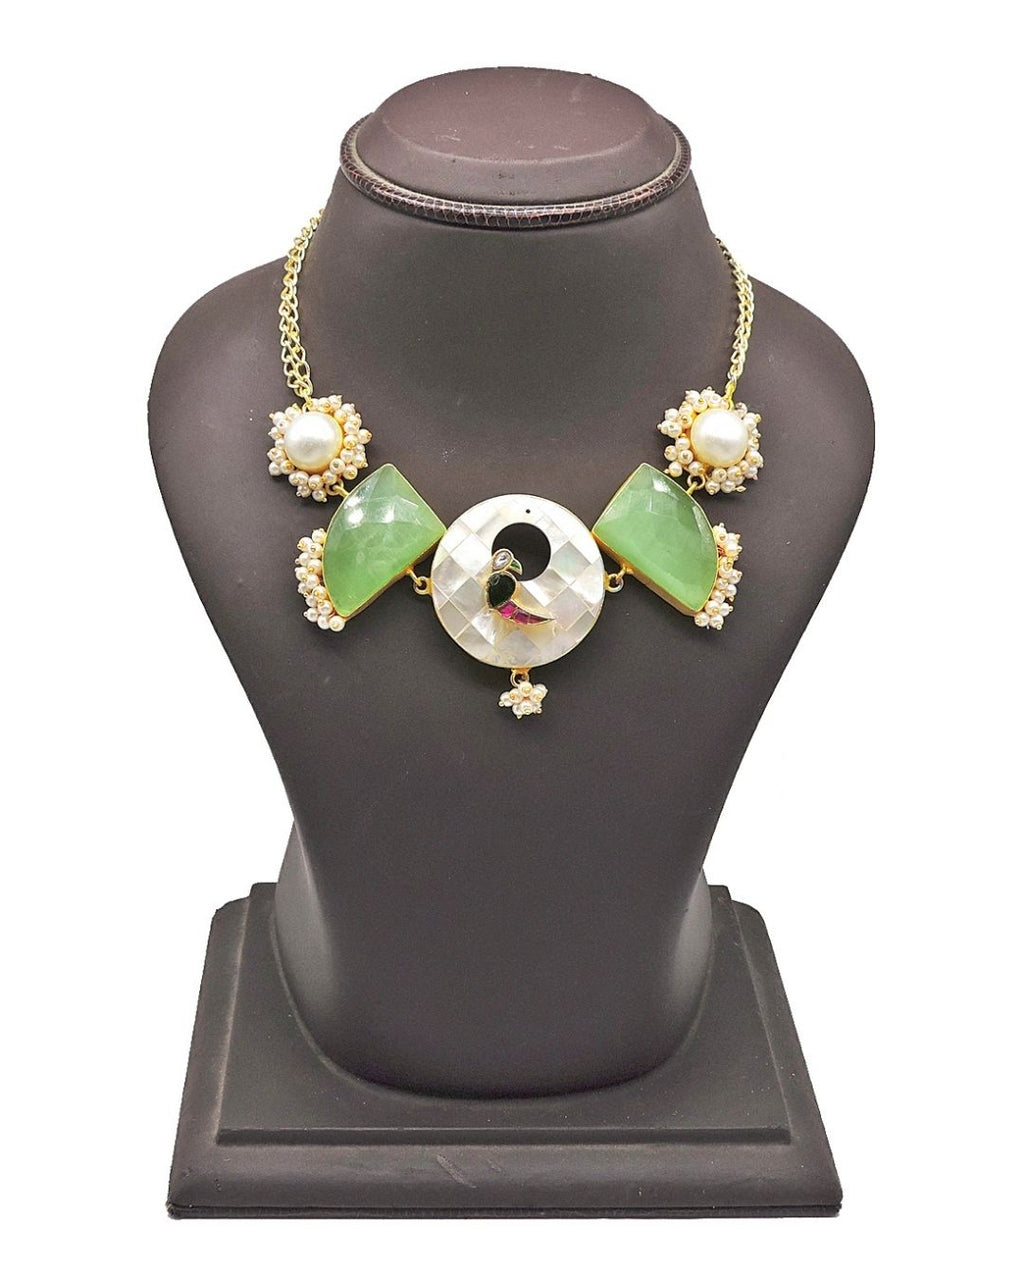 Blaire Necklace - Necklaces - Handcrafted Jewellery - Made in India - Dubai Jewellery, Fashion & Lifestyle - Dori